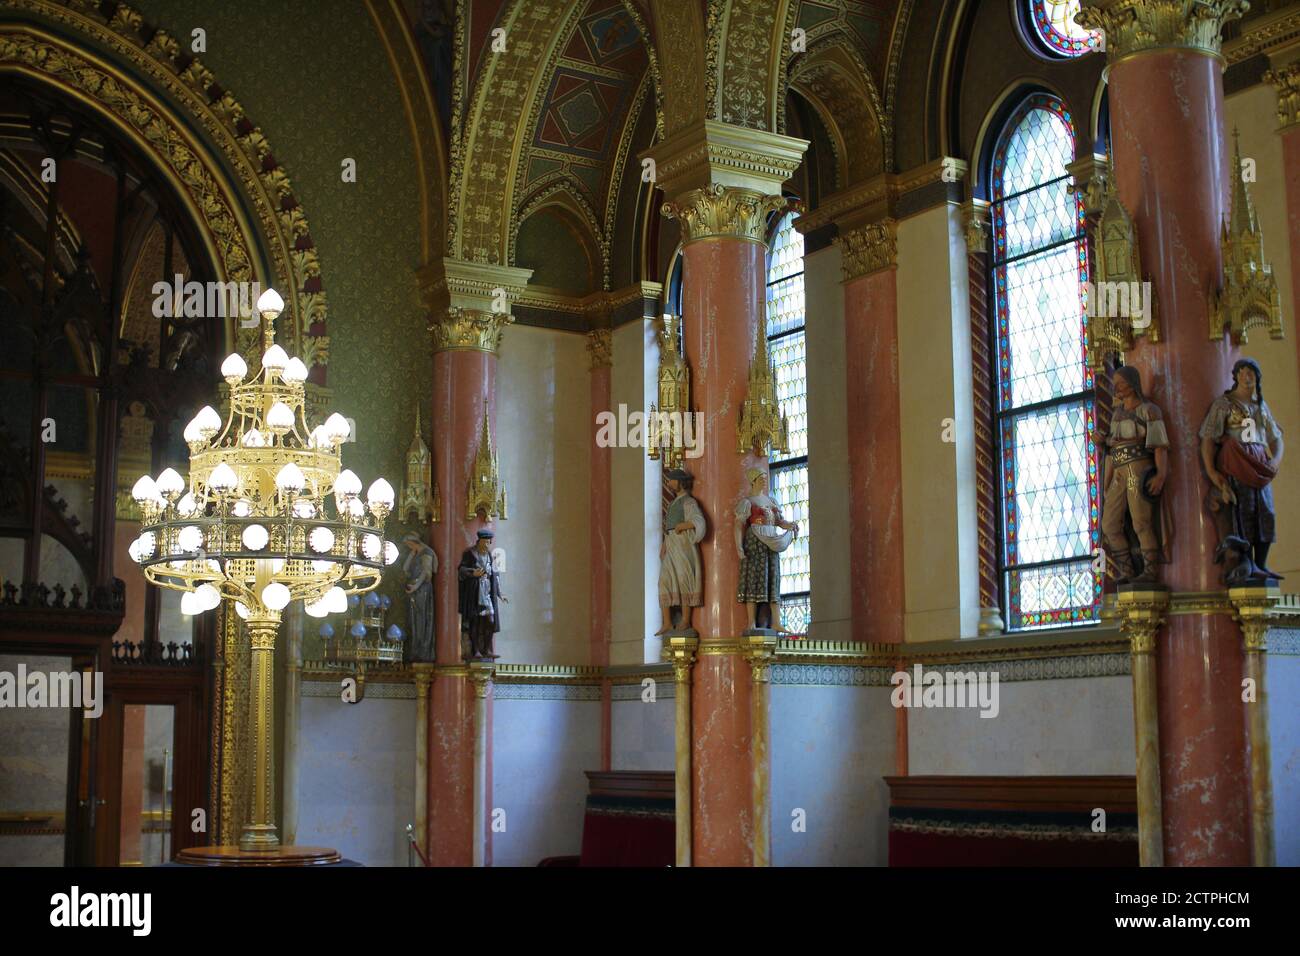 Budapest, Hungary - 15/07/2020: Interior of the Parliament Building in Budapest, Hungary Stock Photo